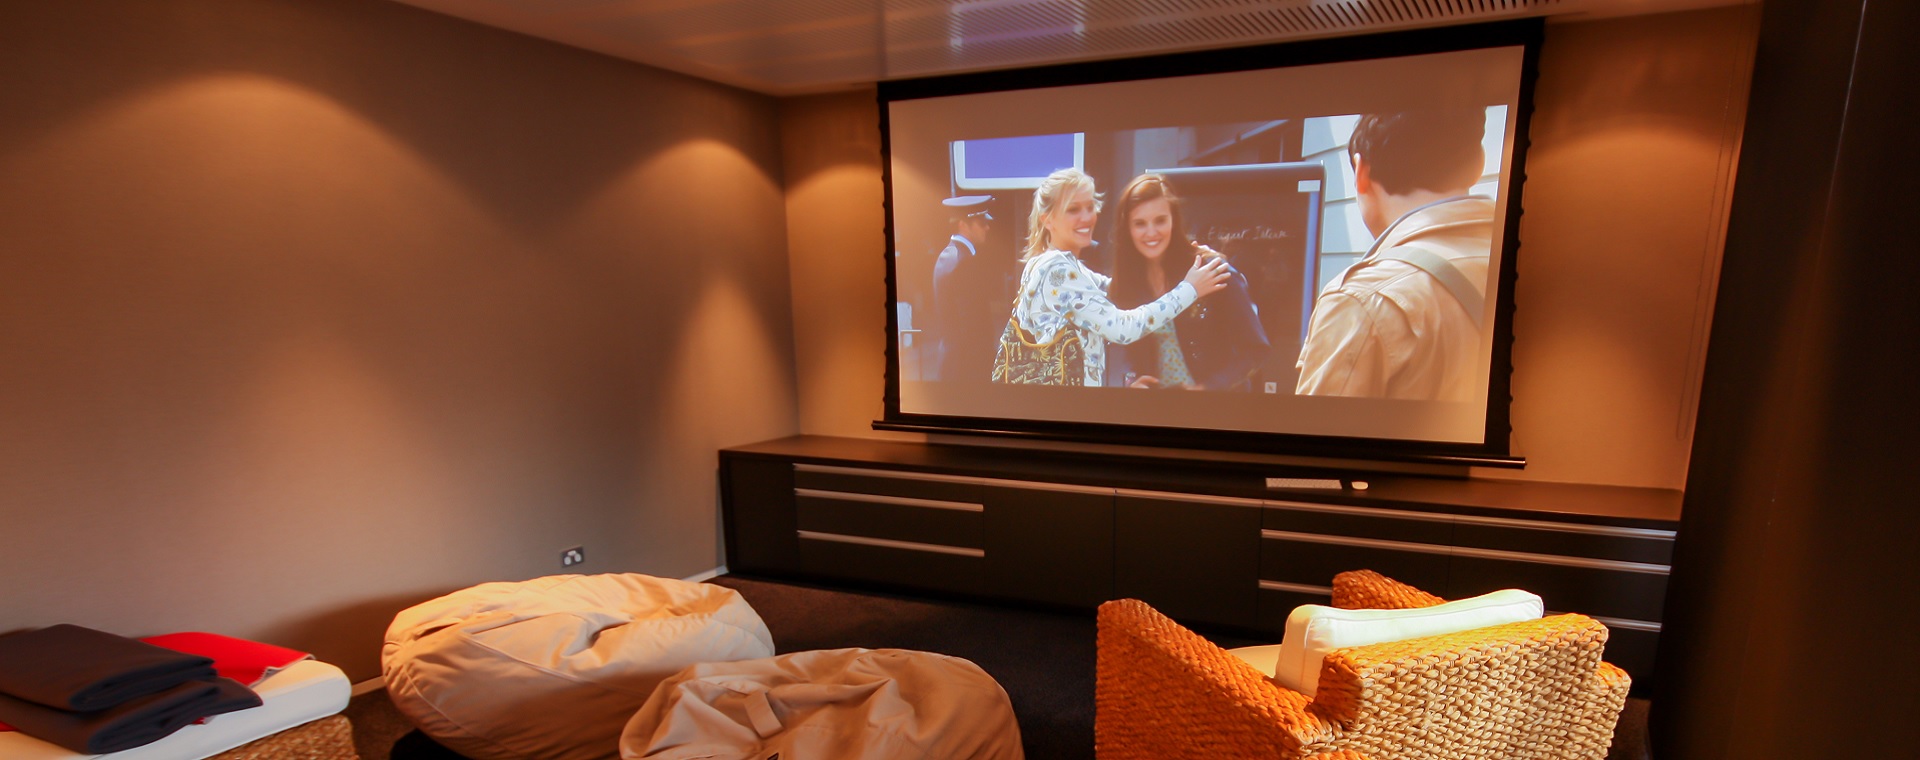 Comfy home threatre with drop-down projector screen, armchairs and beanbags